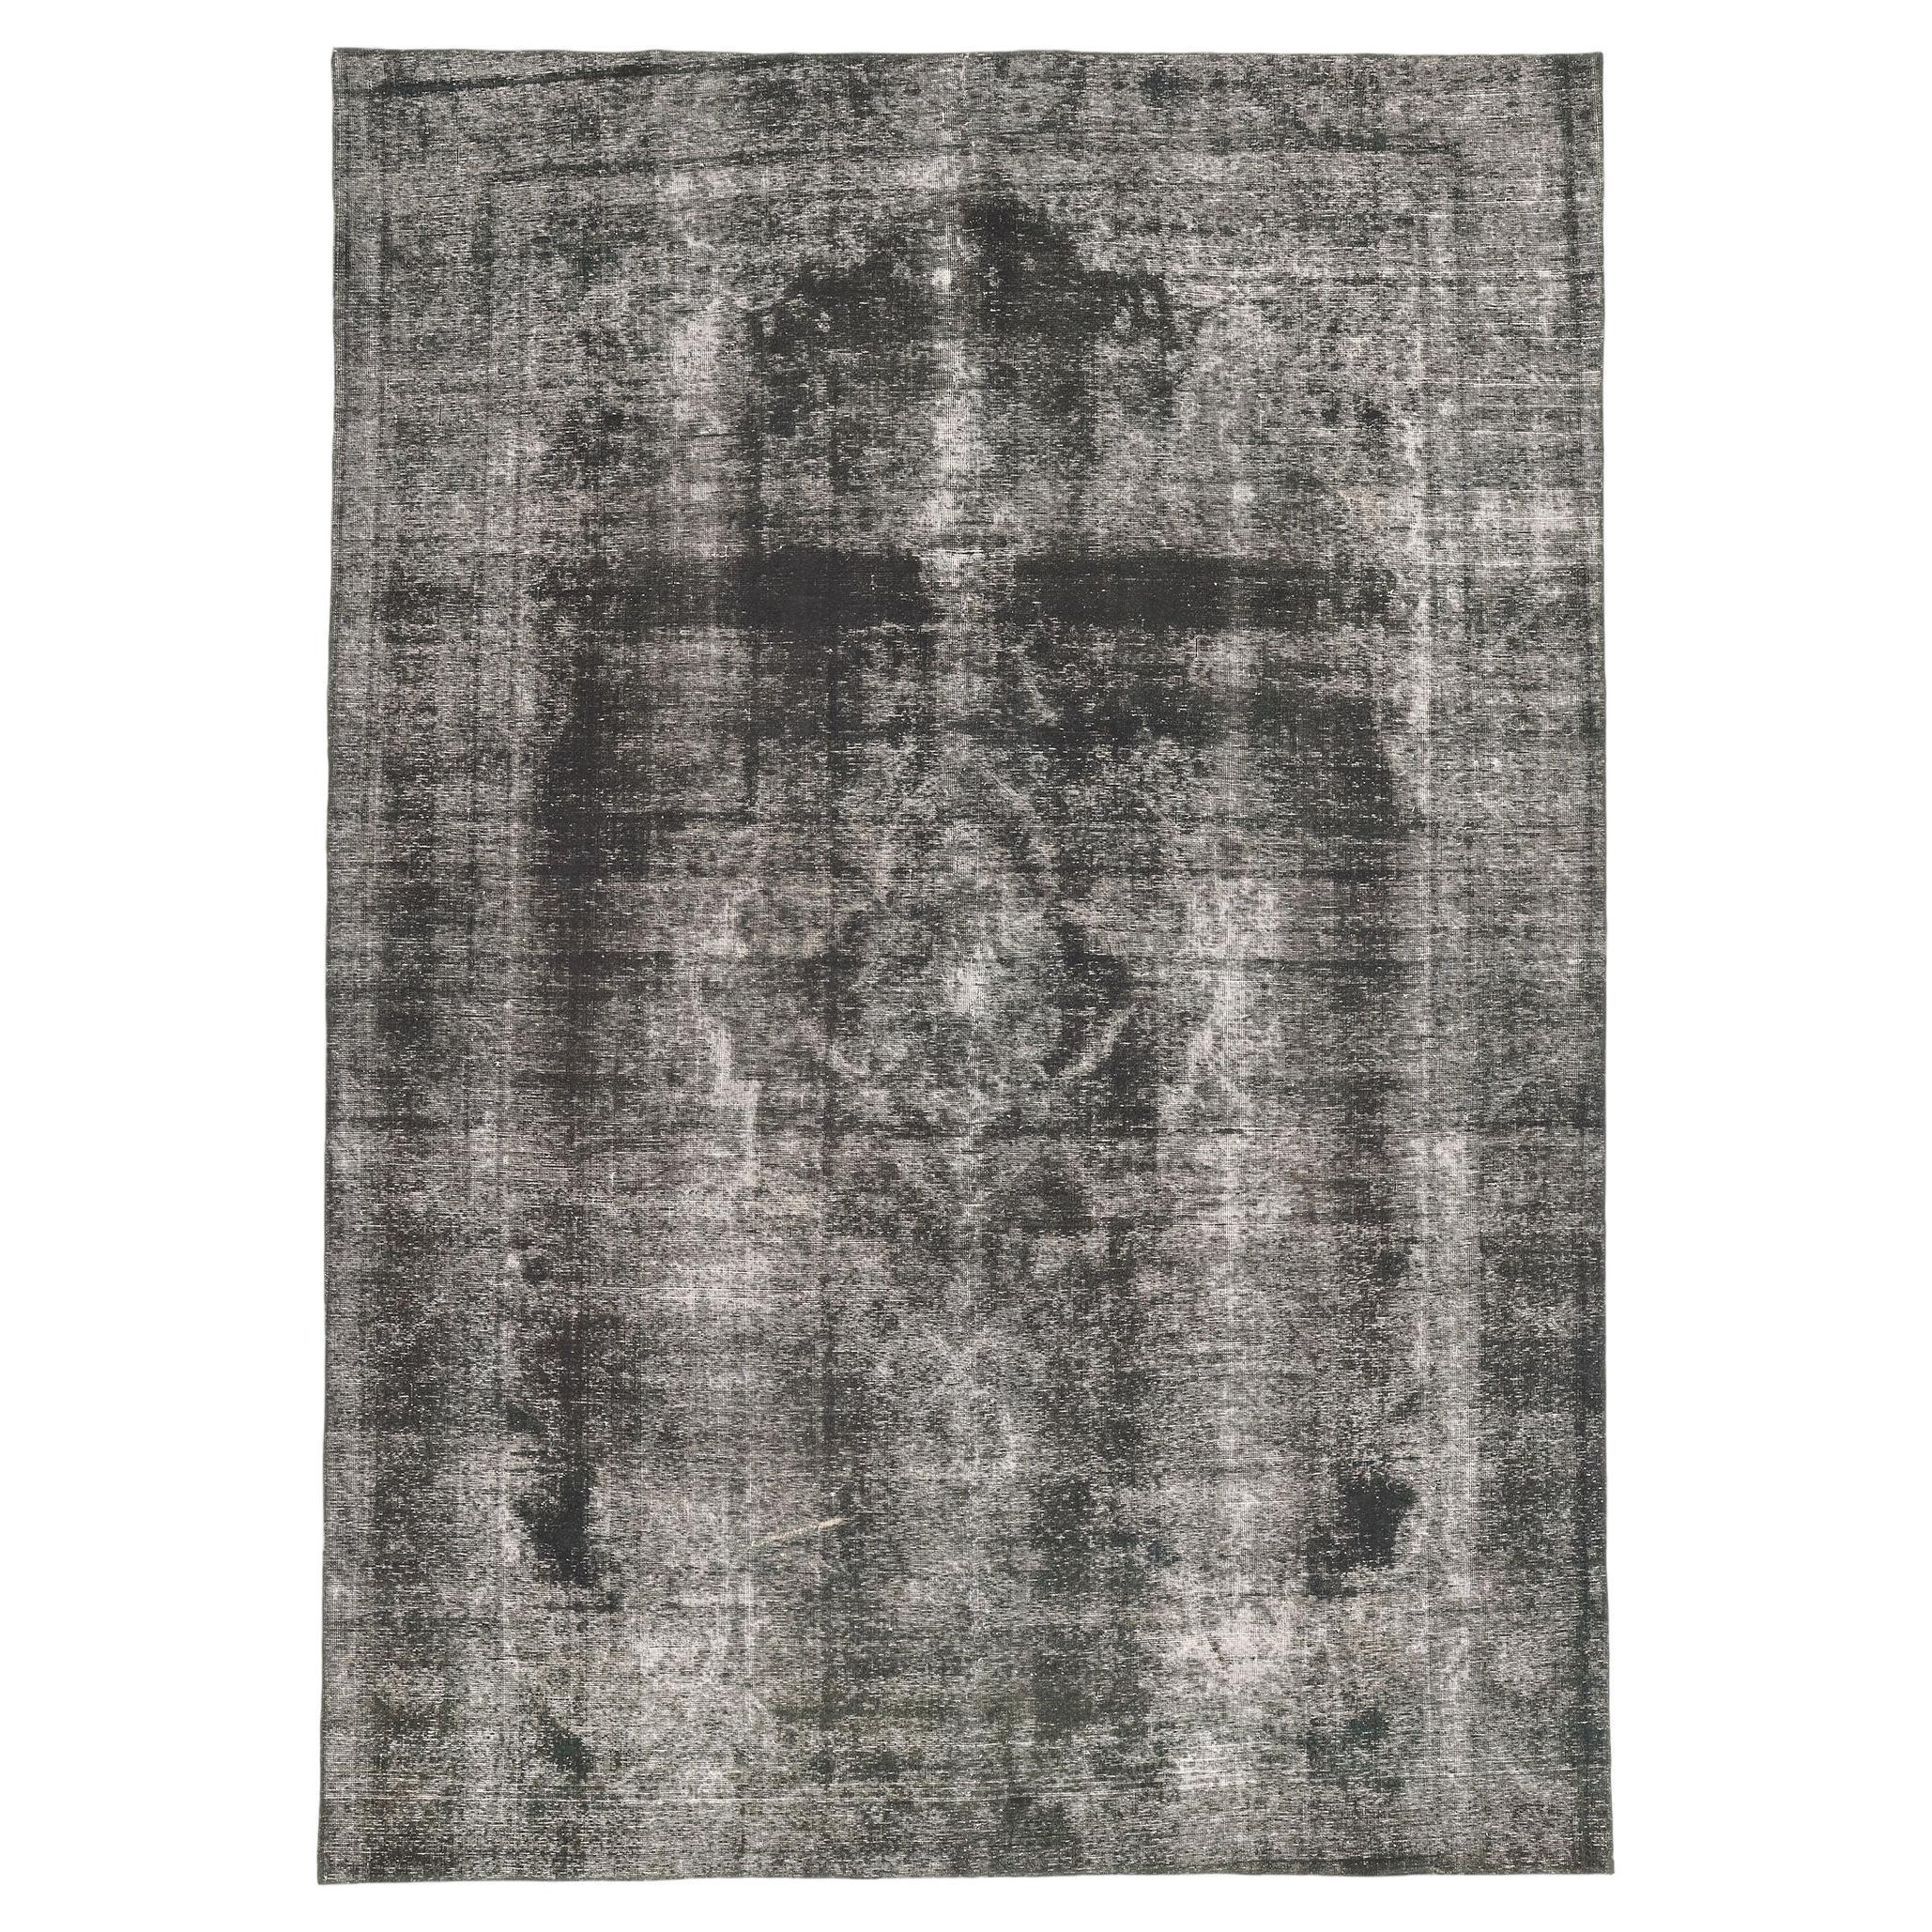 Vintage Turkish Black Overdyed Rug, Modern Industrial Meets Urban Luxe Style